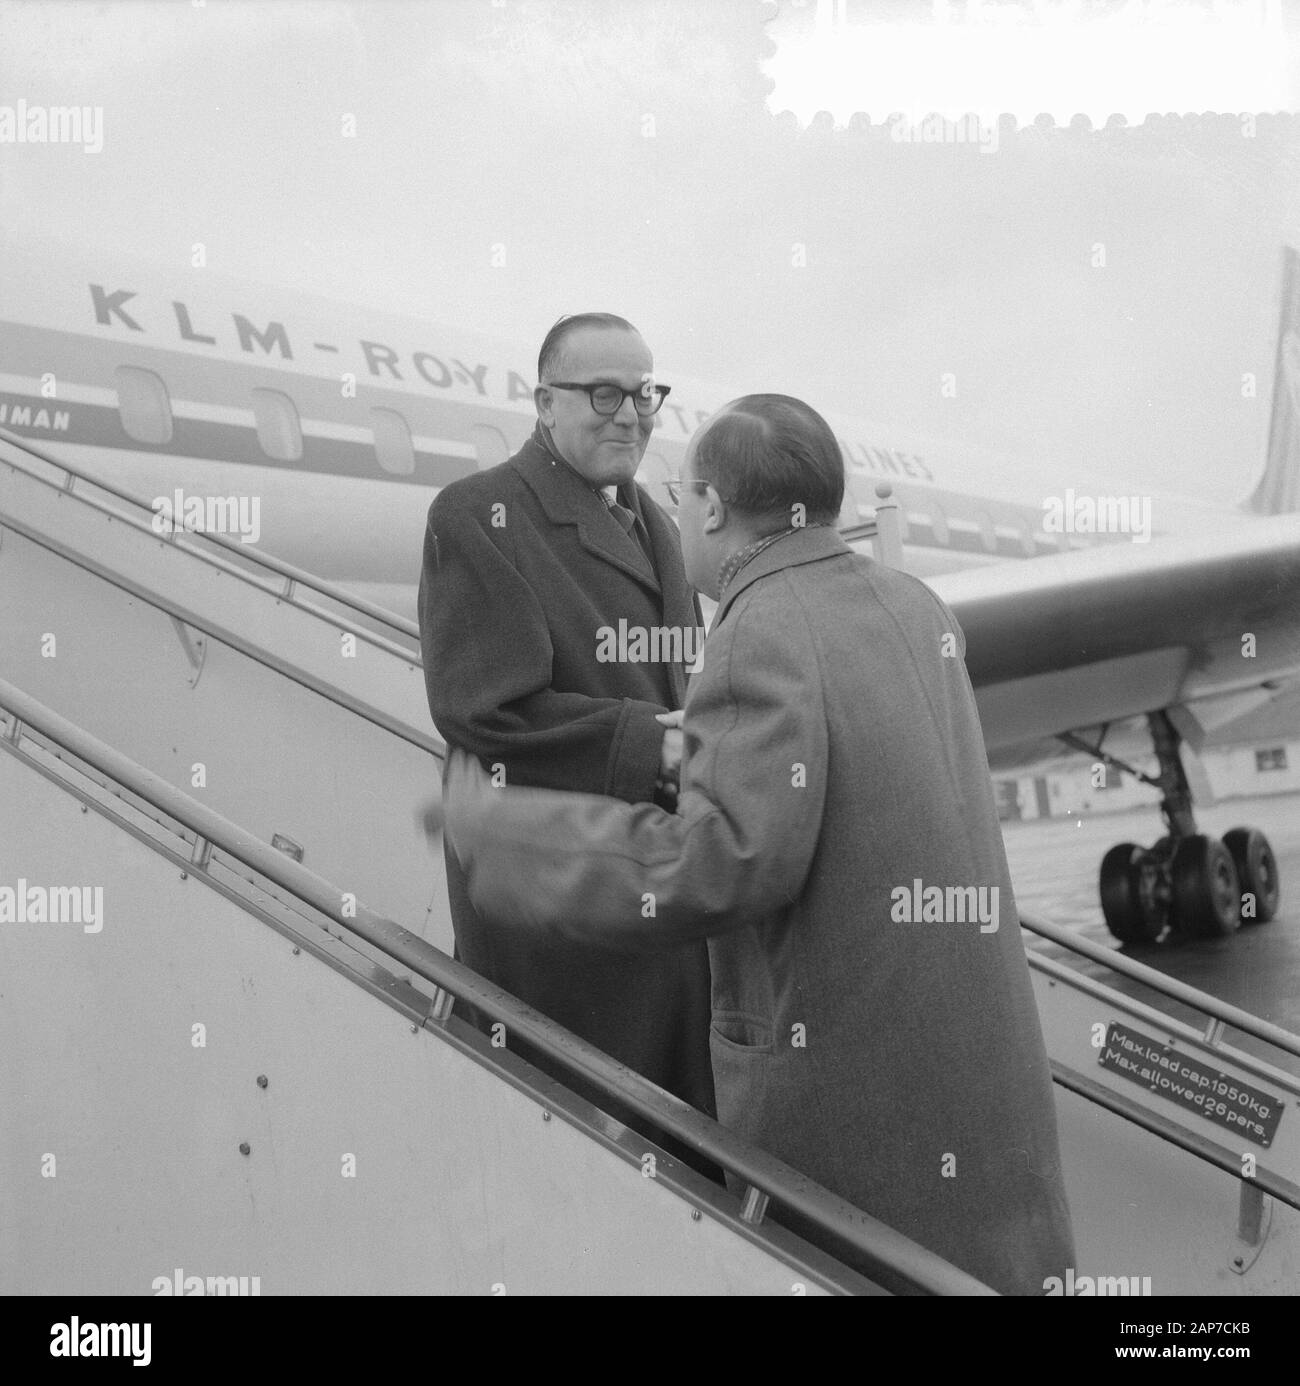 Arrival at Schiphol of Minister of Suriname and the Netherlands Antilles, Minister Cals greets Minister Mr. J. C. Debrot of the Netherlands Antilles Date: 29 January 1961 Location: Amsterdam, Noord-Holland Keywords: Arrivals, Ministers Personal Name: Cals, Jo, Minister Mr. J. C. Debrot Stock Photo